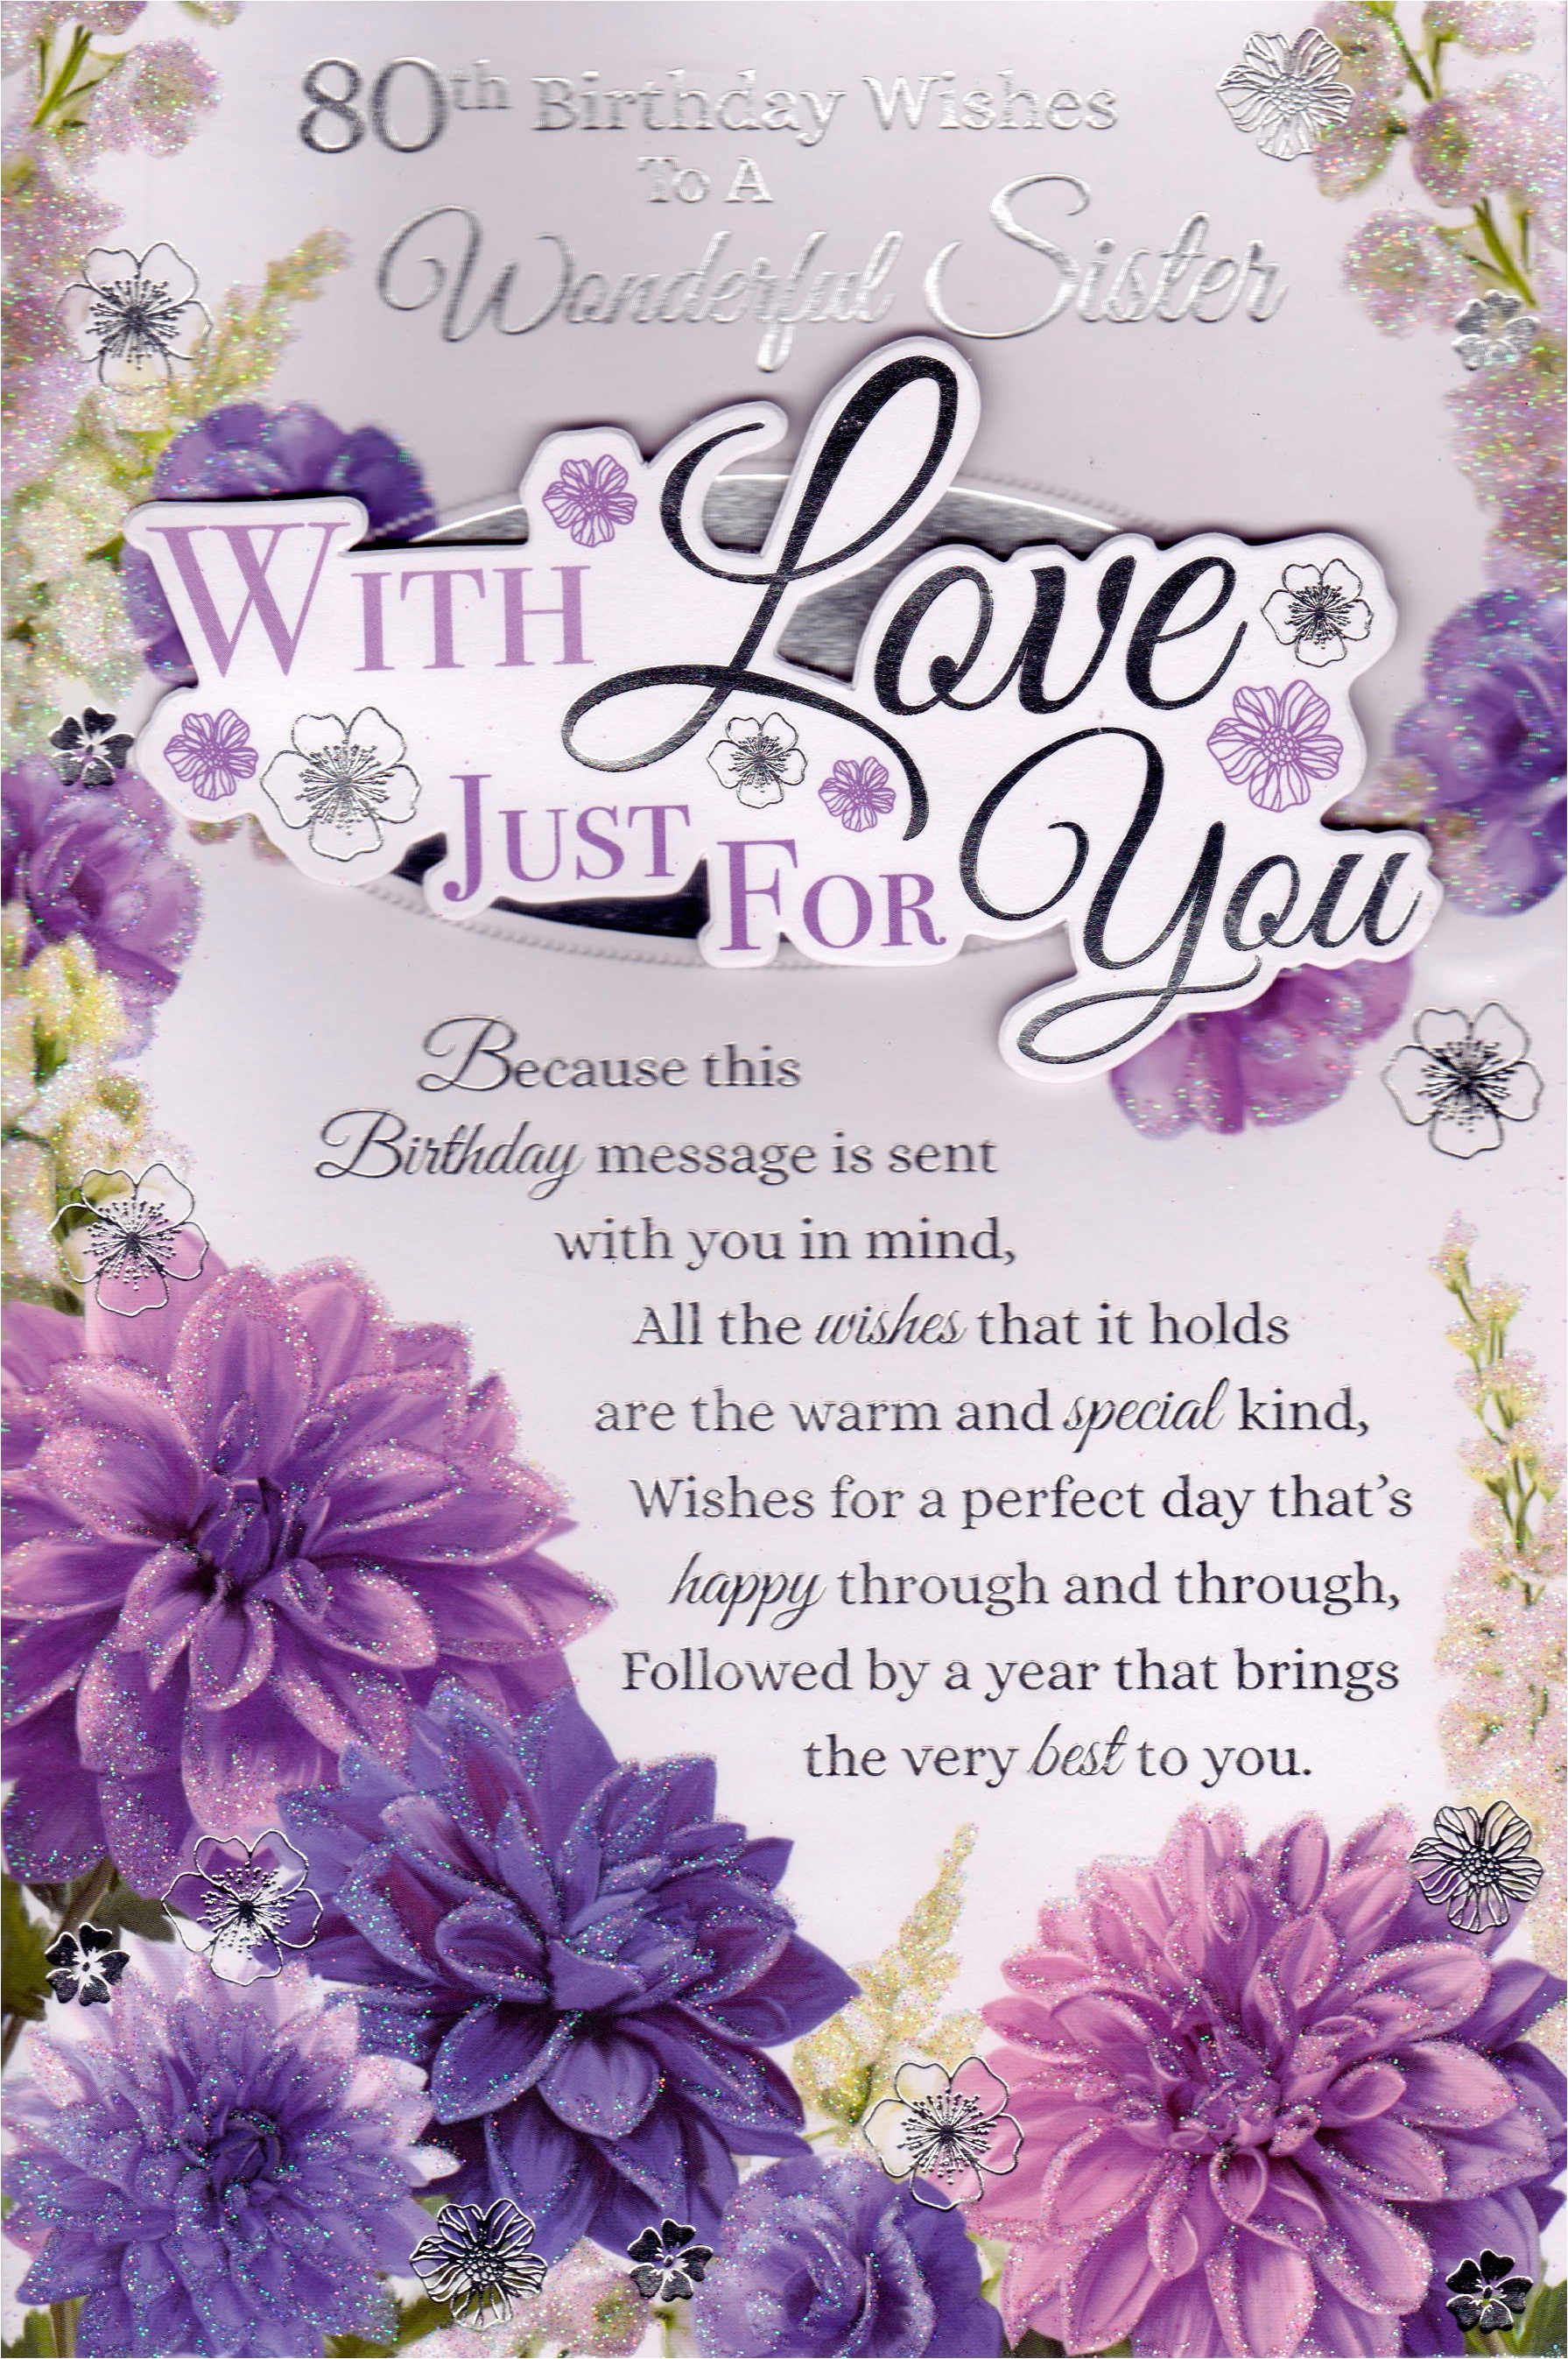 80th birthday wishes to a wonderful sister card